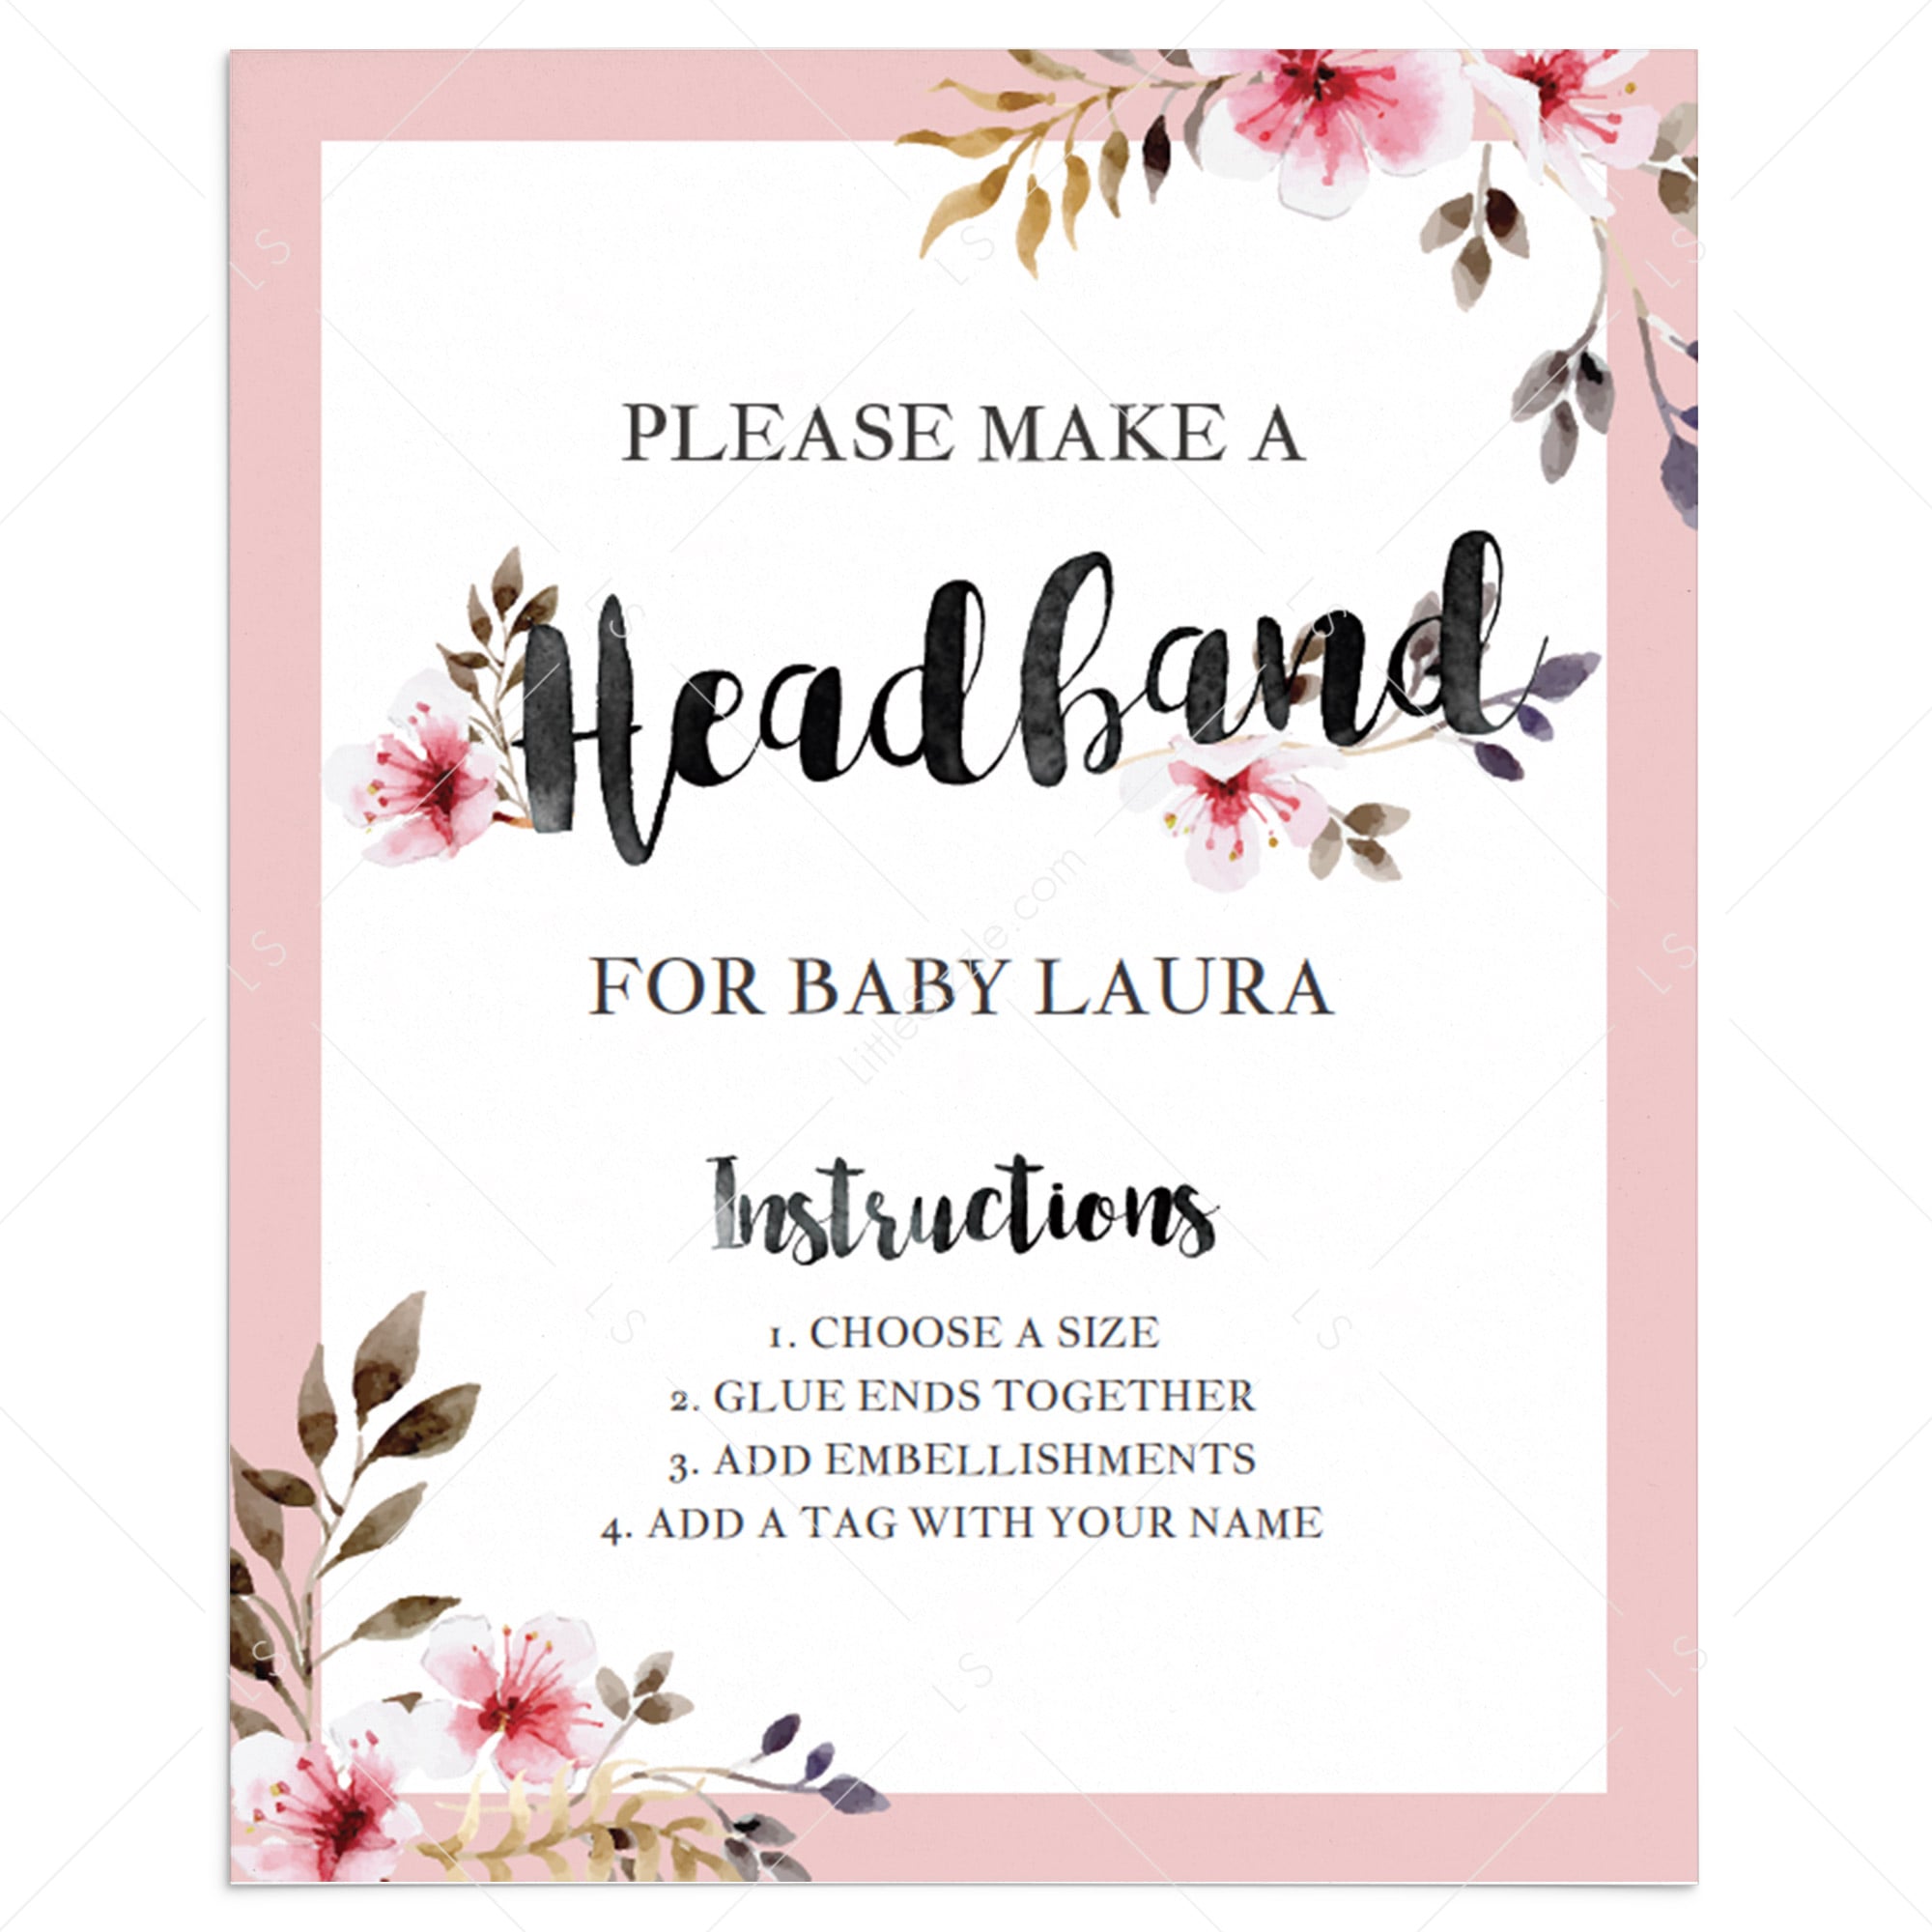 Headband station sign for floral baby shower printable by LittleSizzle